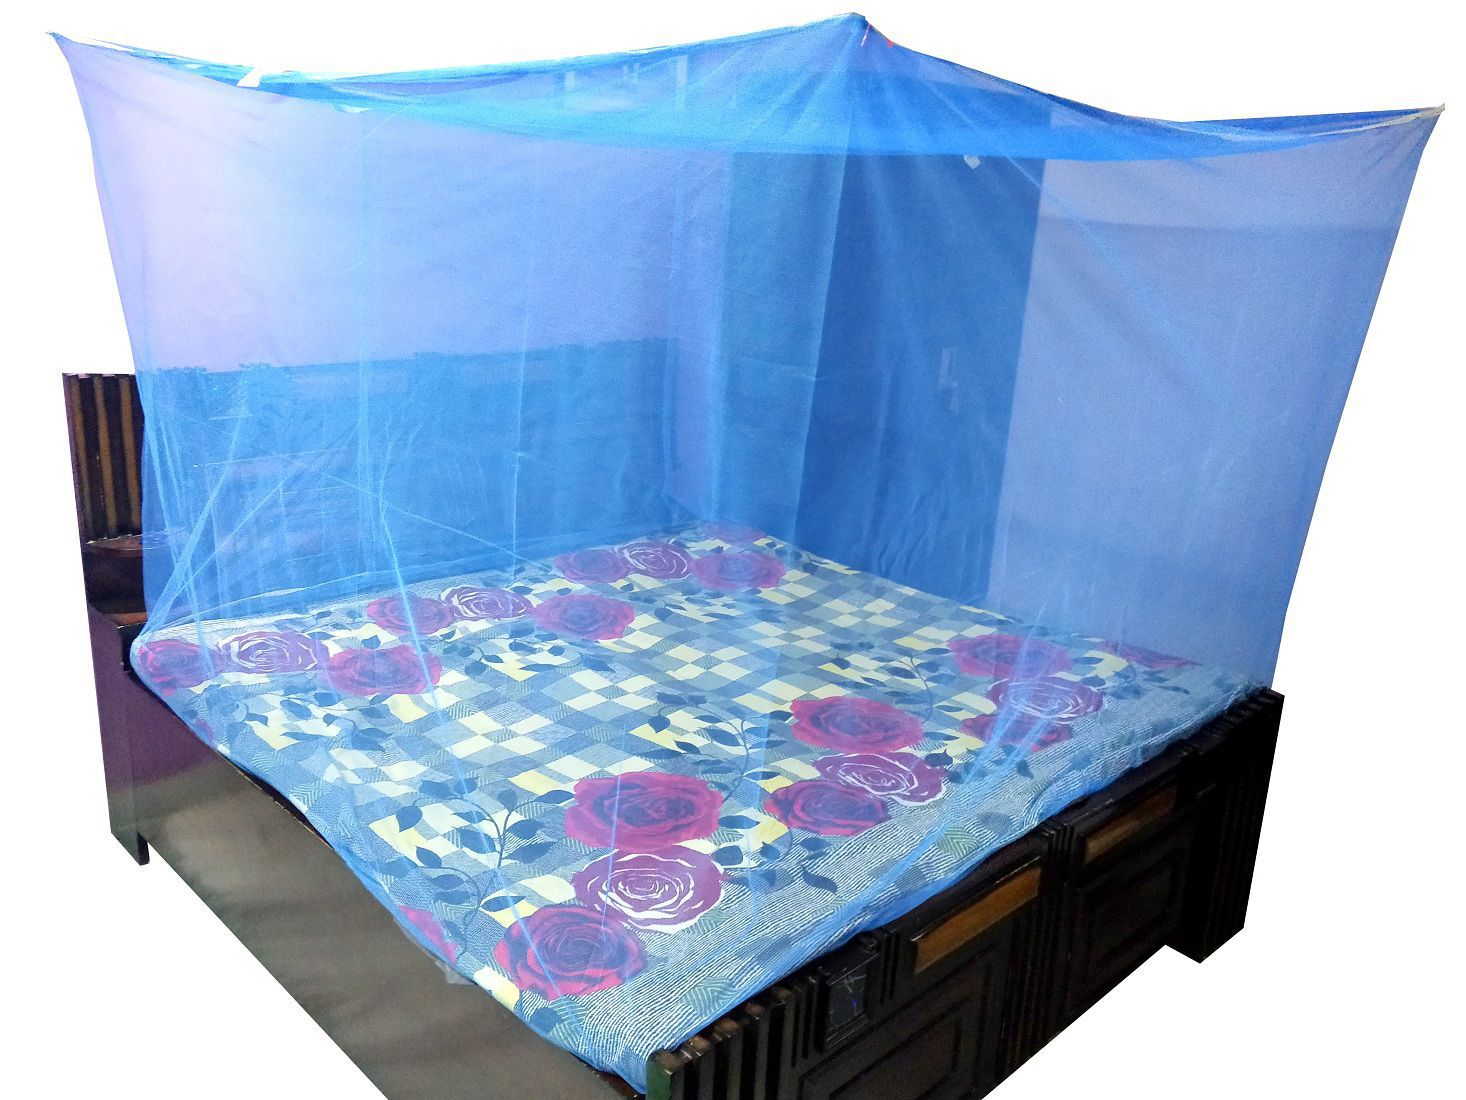 Trendmakerz 6x6 Feet Blue Mosquito Net For Double Bed ...